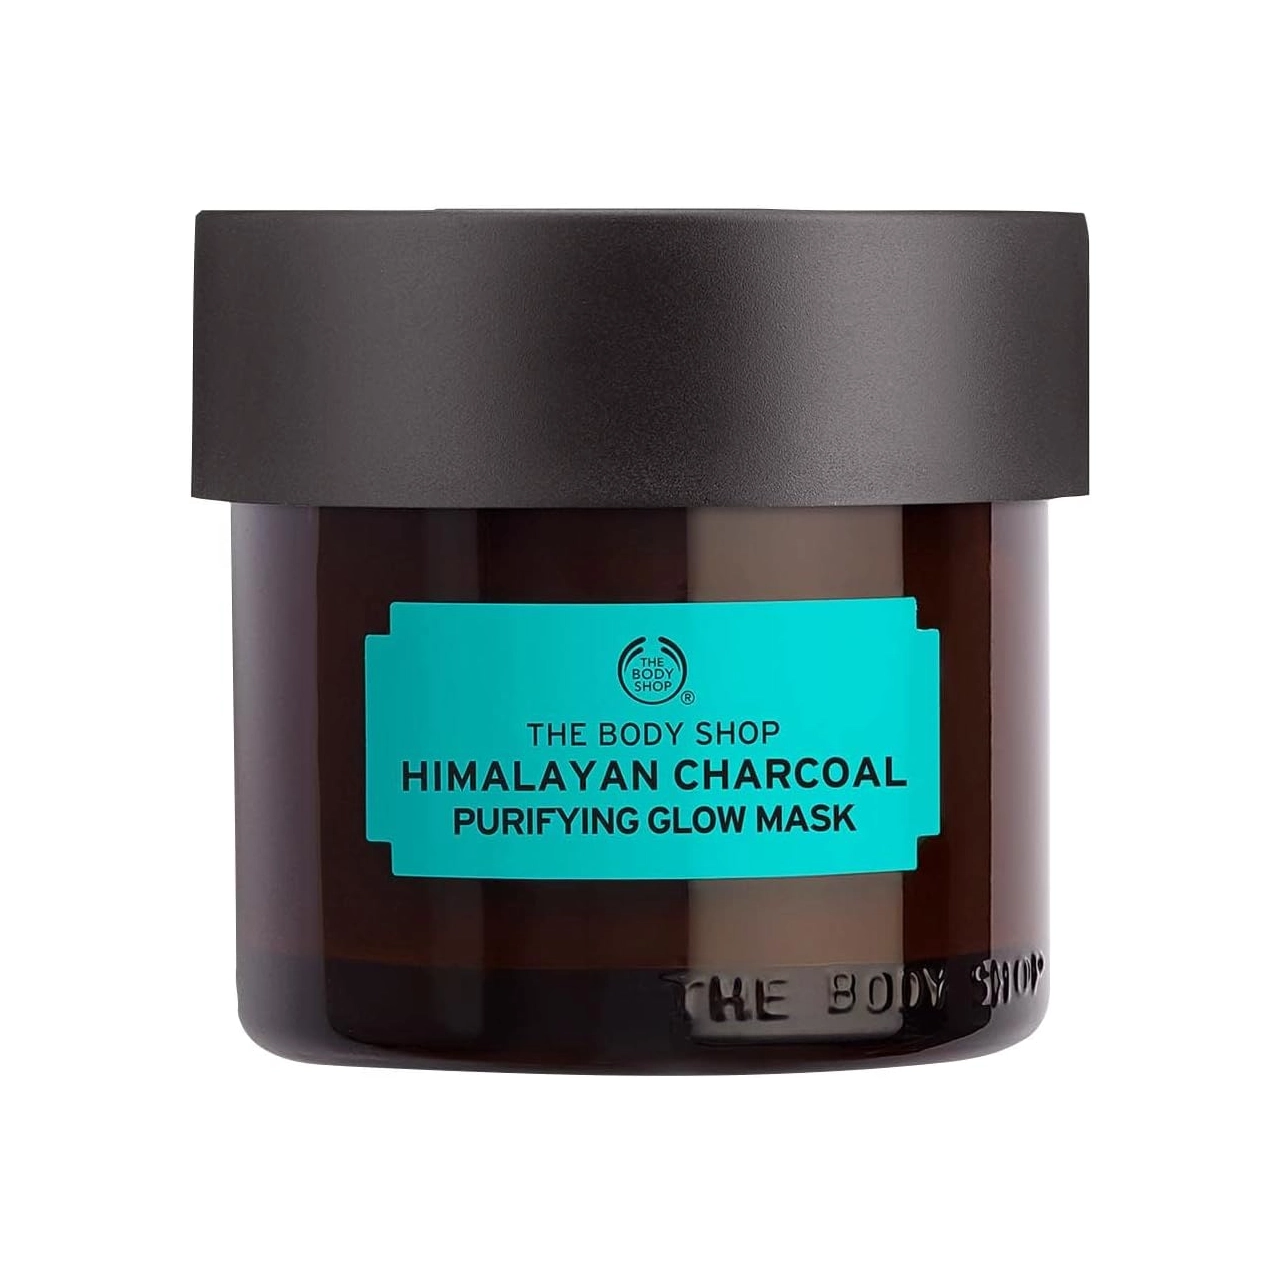 Jar of The Body Shop Himalayan Charcoal Purifying Glow Mask on a white background